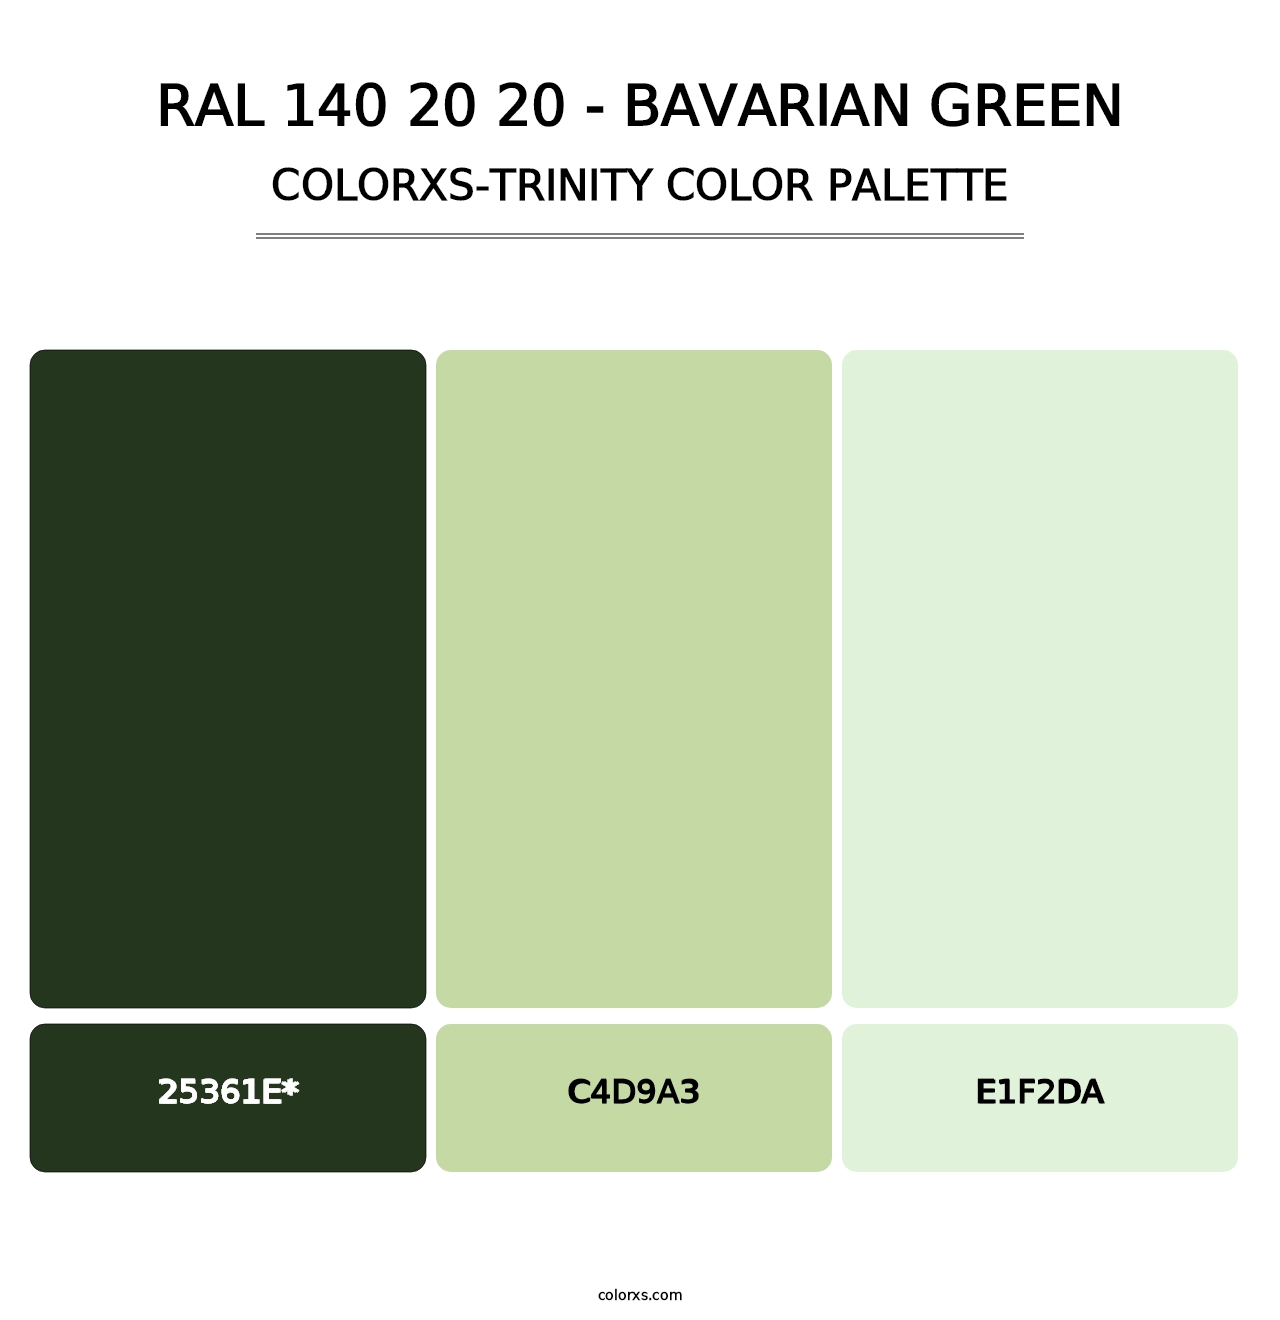 RAL 140 20 20 - Bavarian Green - Colorxs Trinity Palette